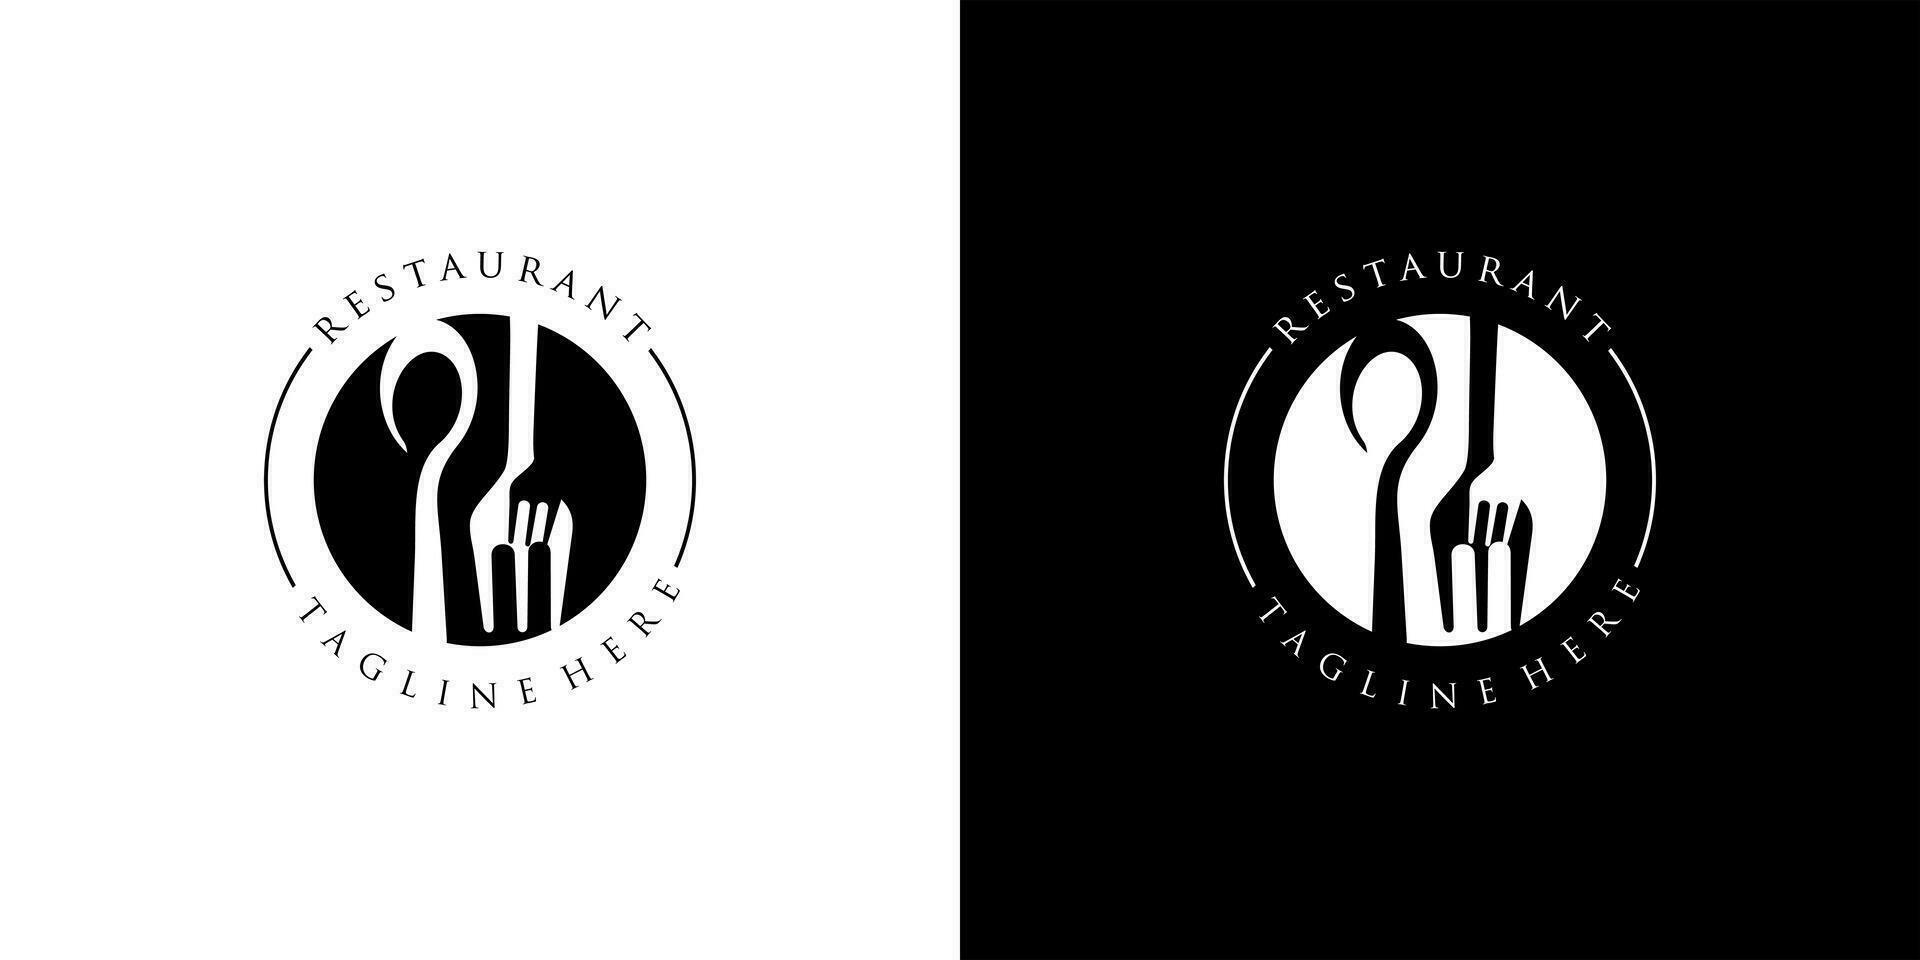 Restaurant logo with spoon and fork icon, modern concept vector